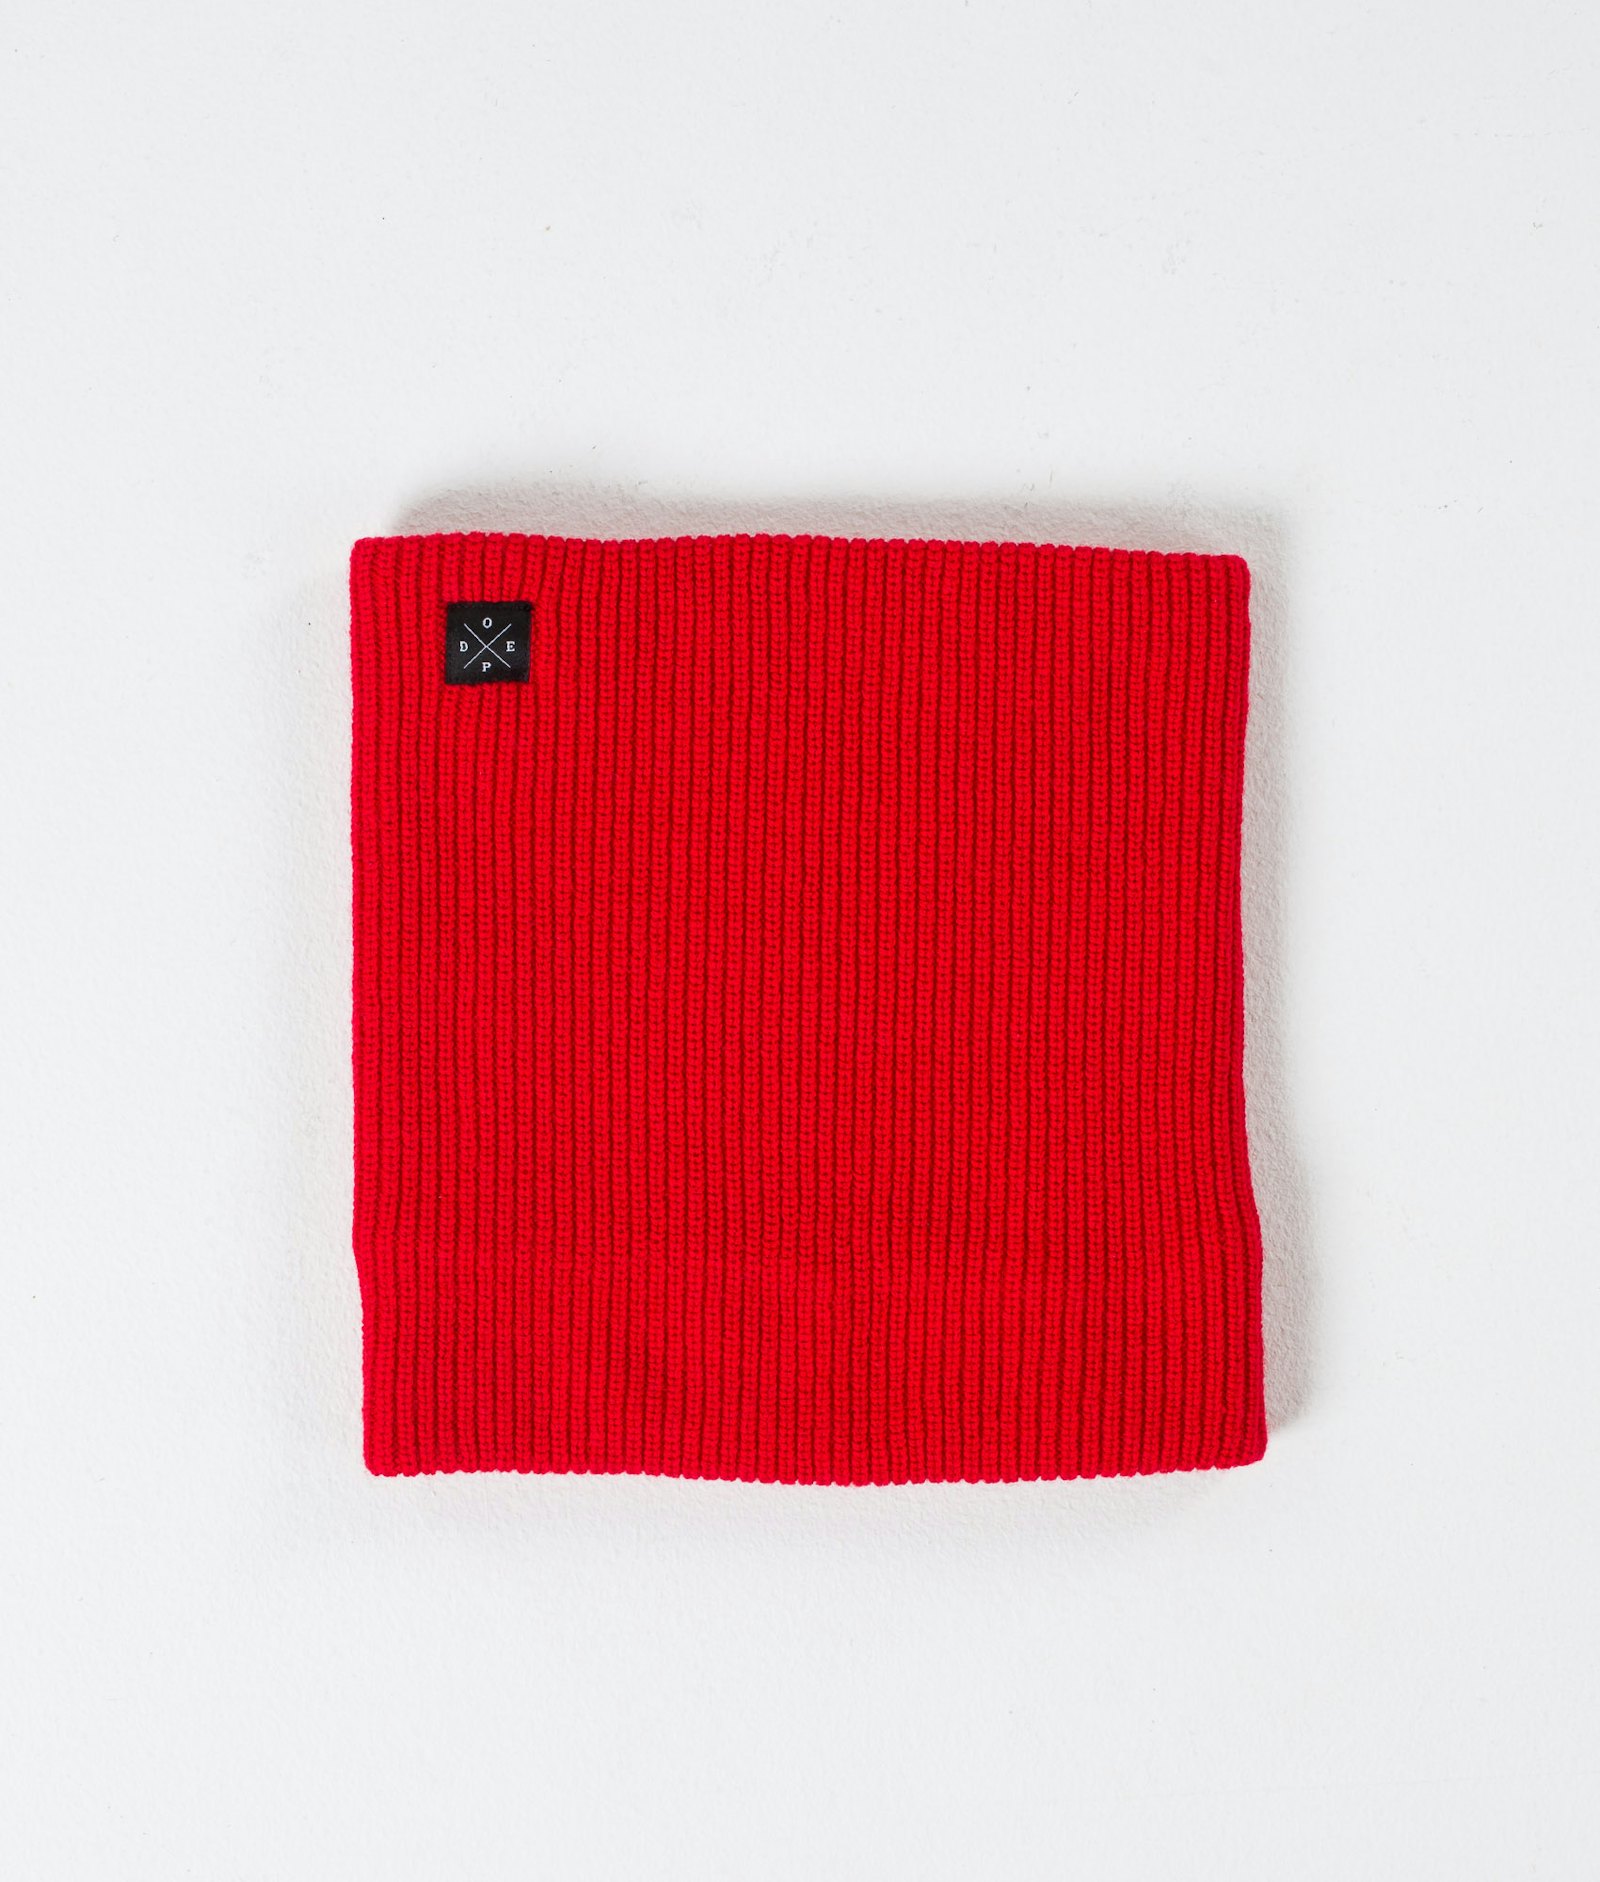 2X-UP Knitted Tour de cou Red